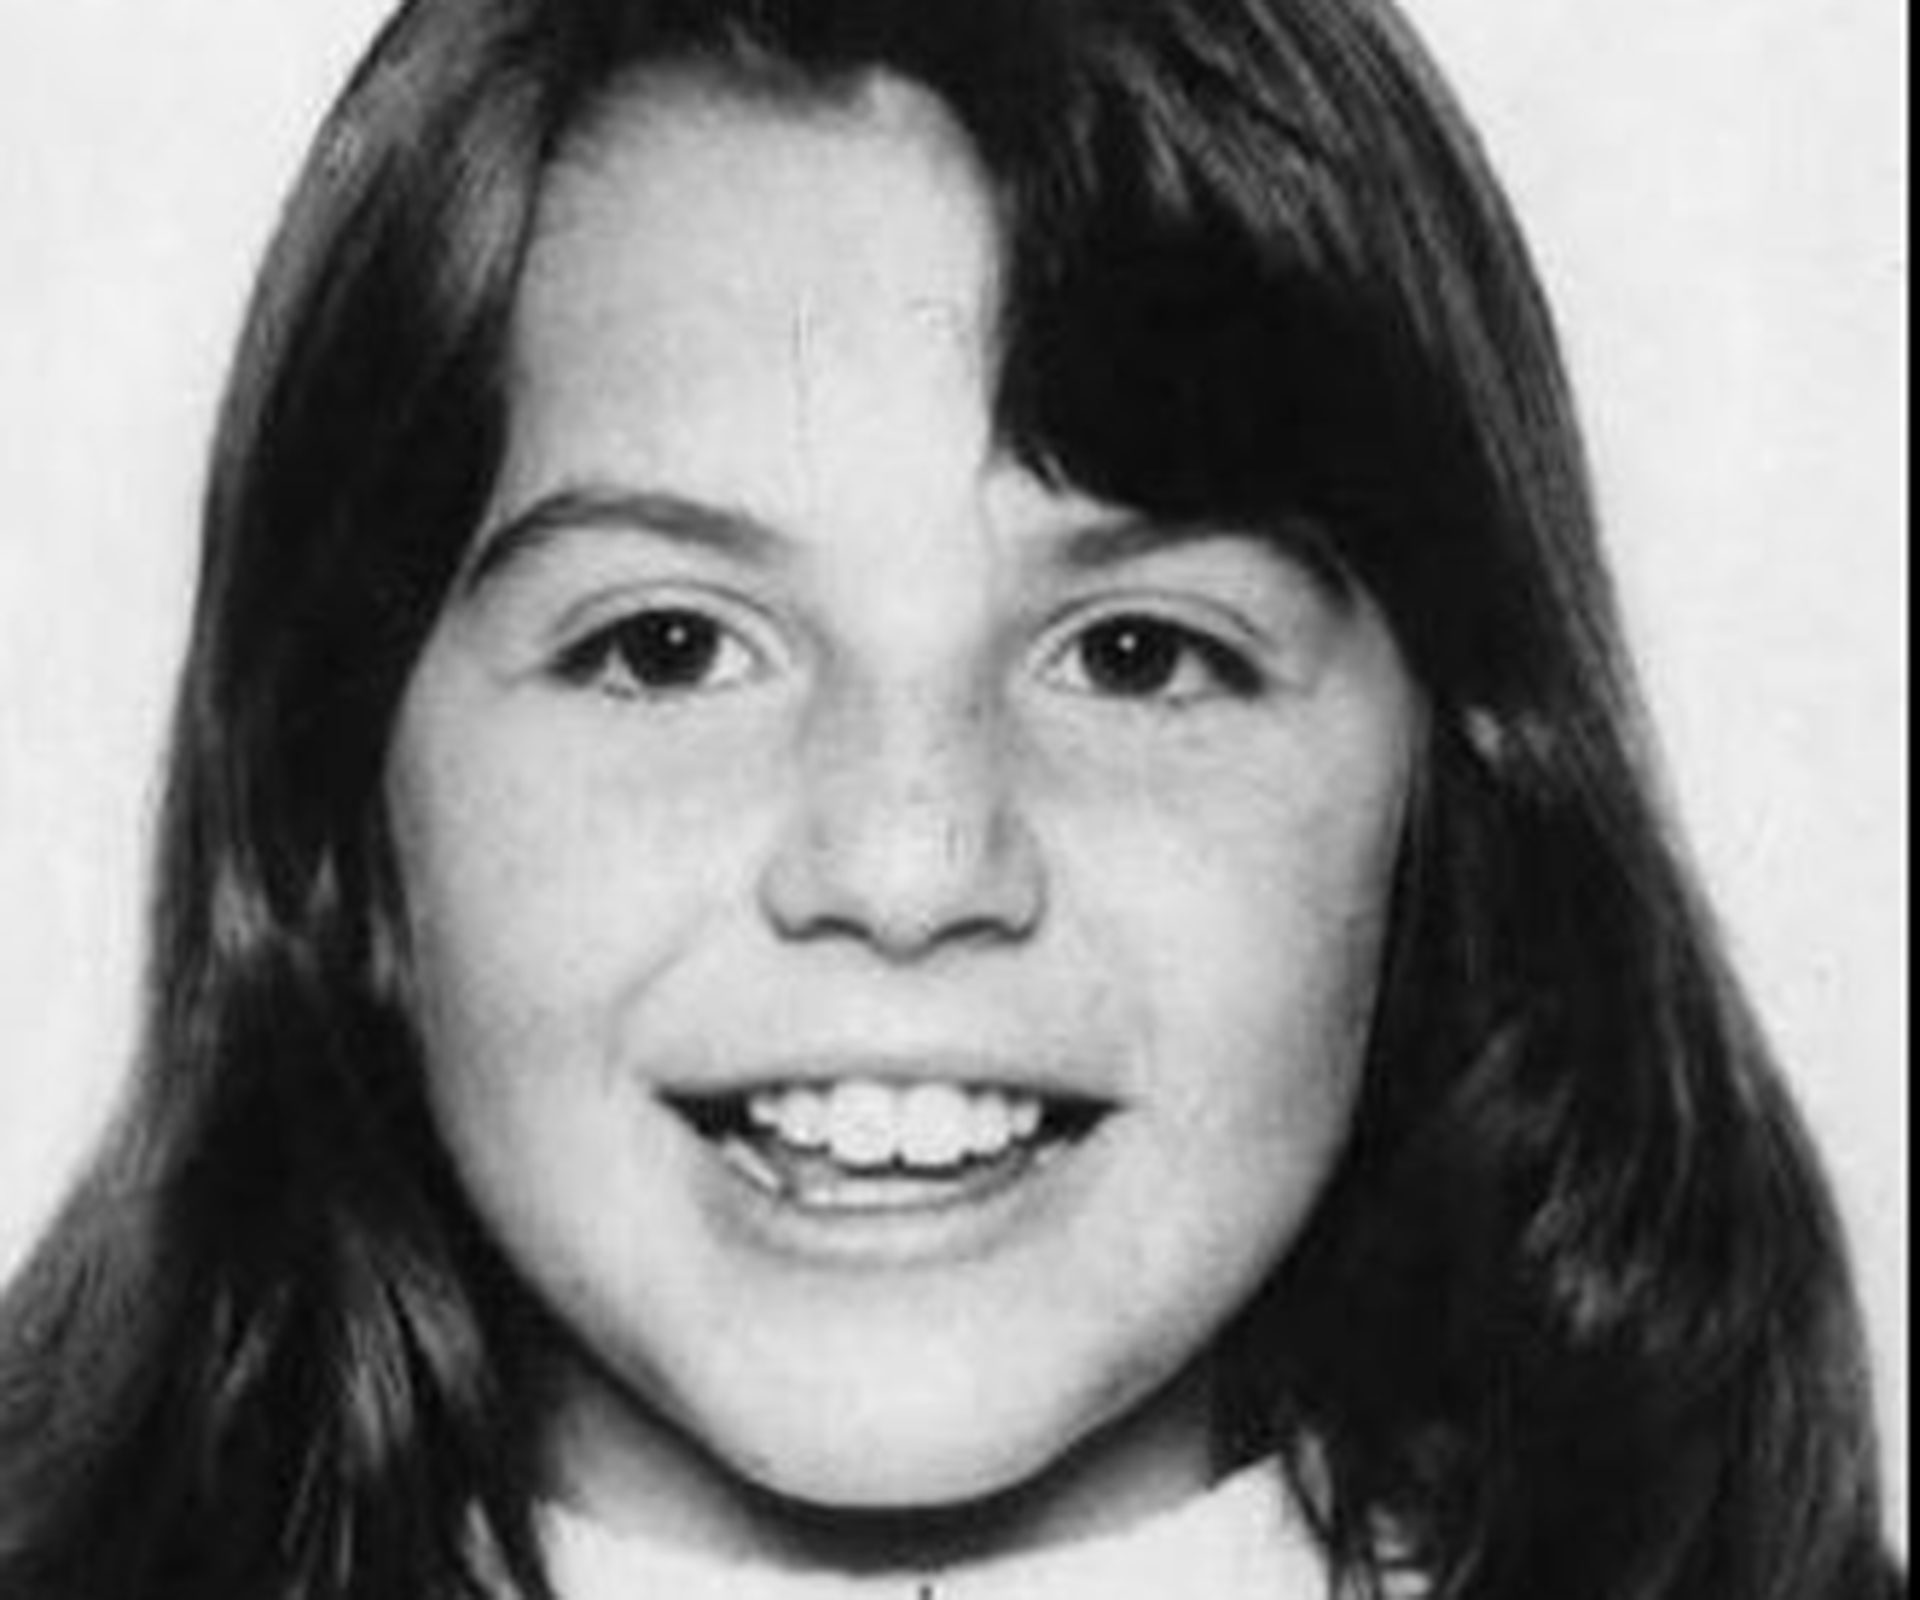 Louise Bell murder 33 years ago: Man found guilty